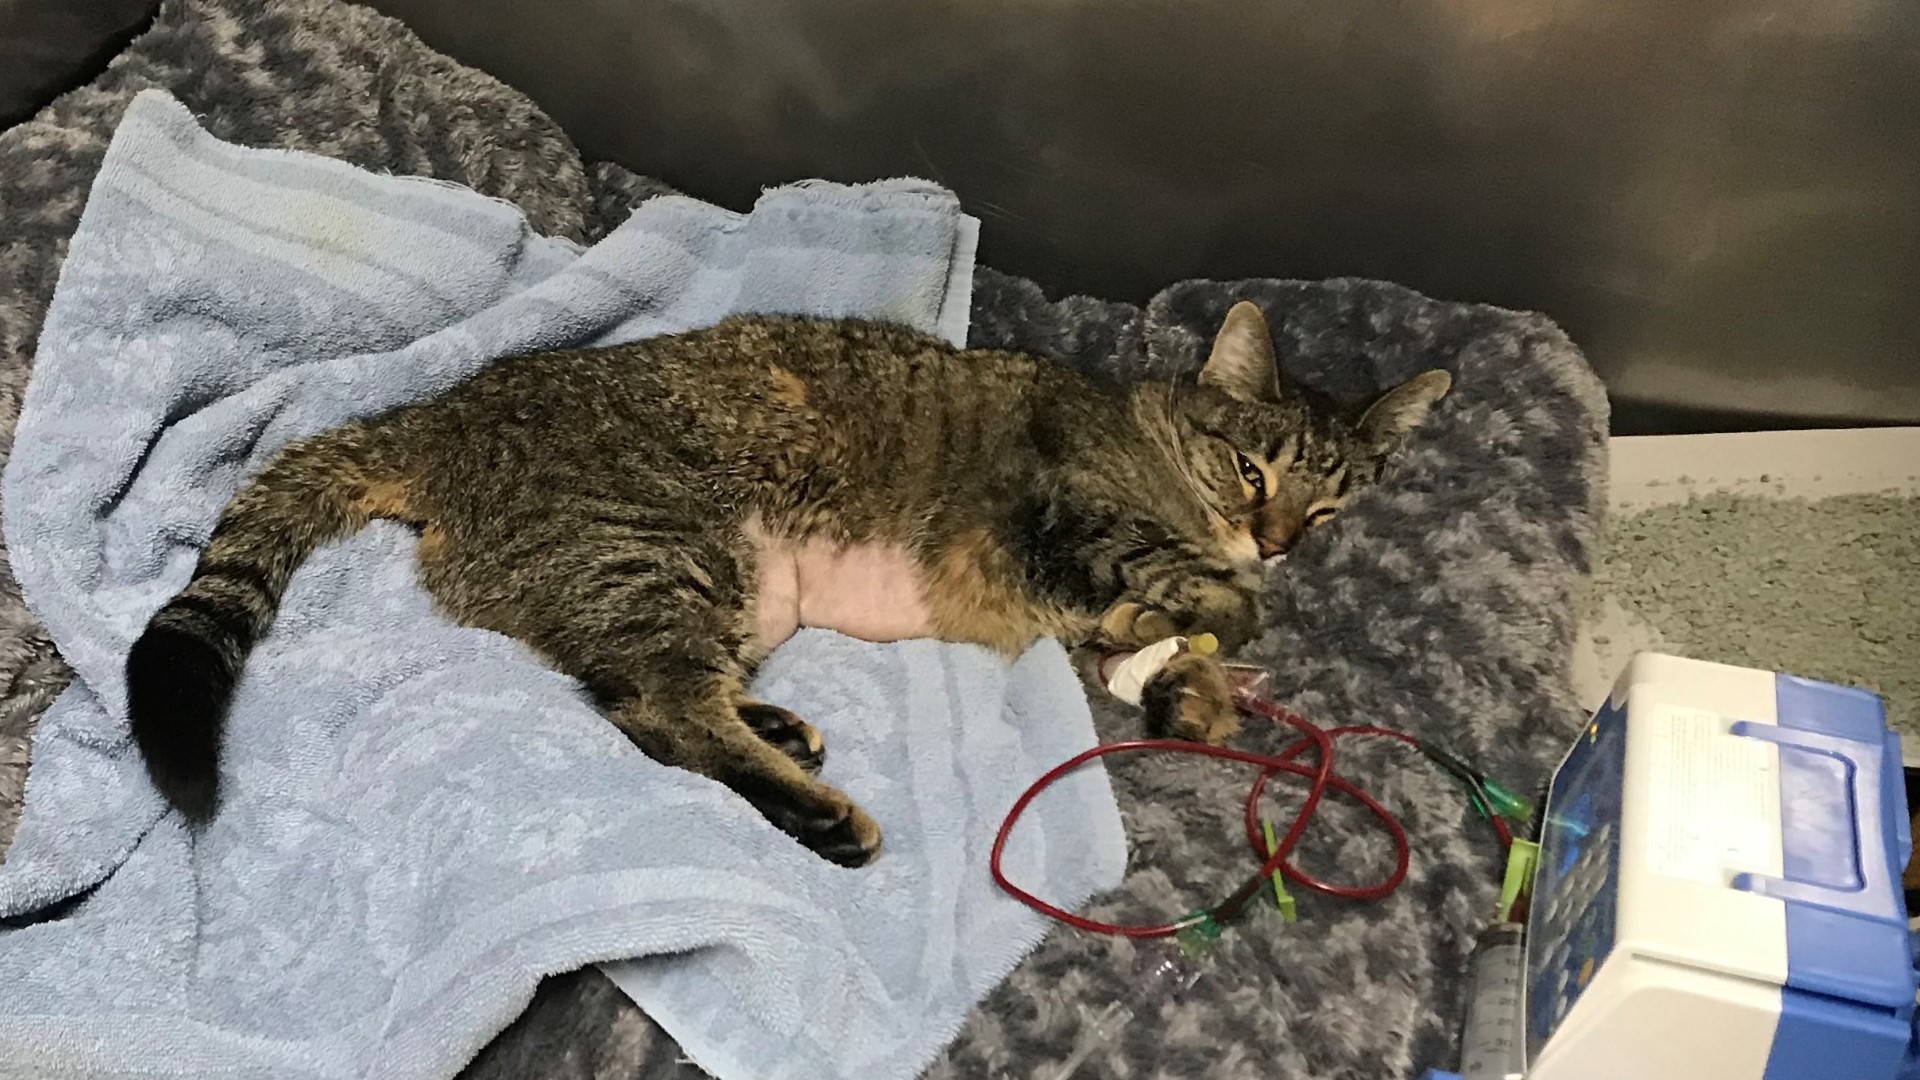 Chaos the cat was shot twice with pellets. It was an act that neighbors couldn't believe happened it in their neighborhood. Now, Chaos is fighting for his life as medical bills continue to grow.